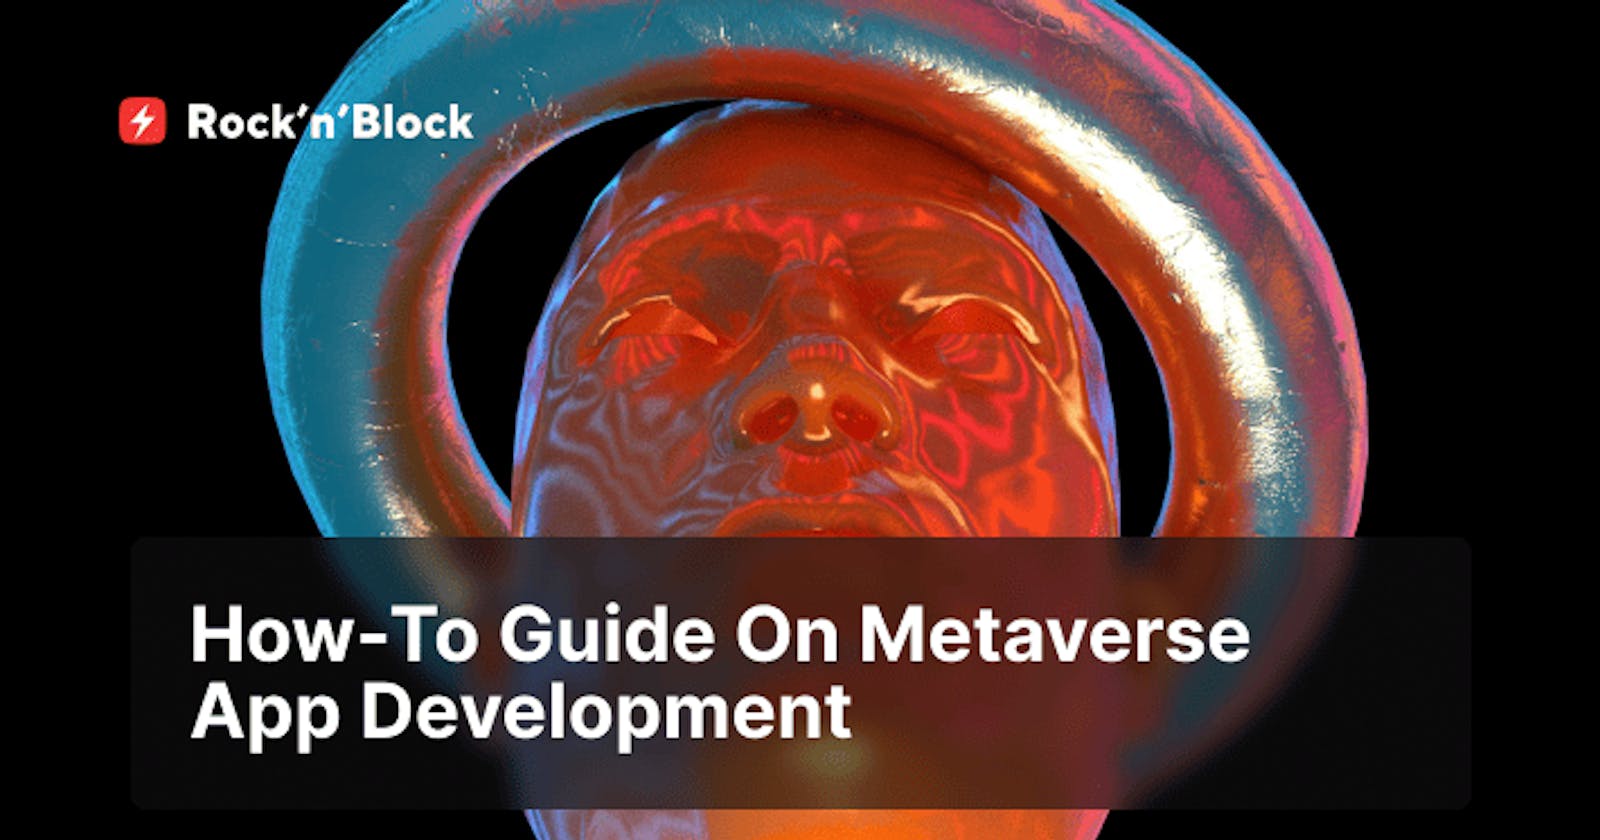 The Definitive How-To Guide for Metaverse App Development